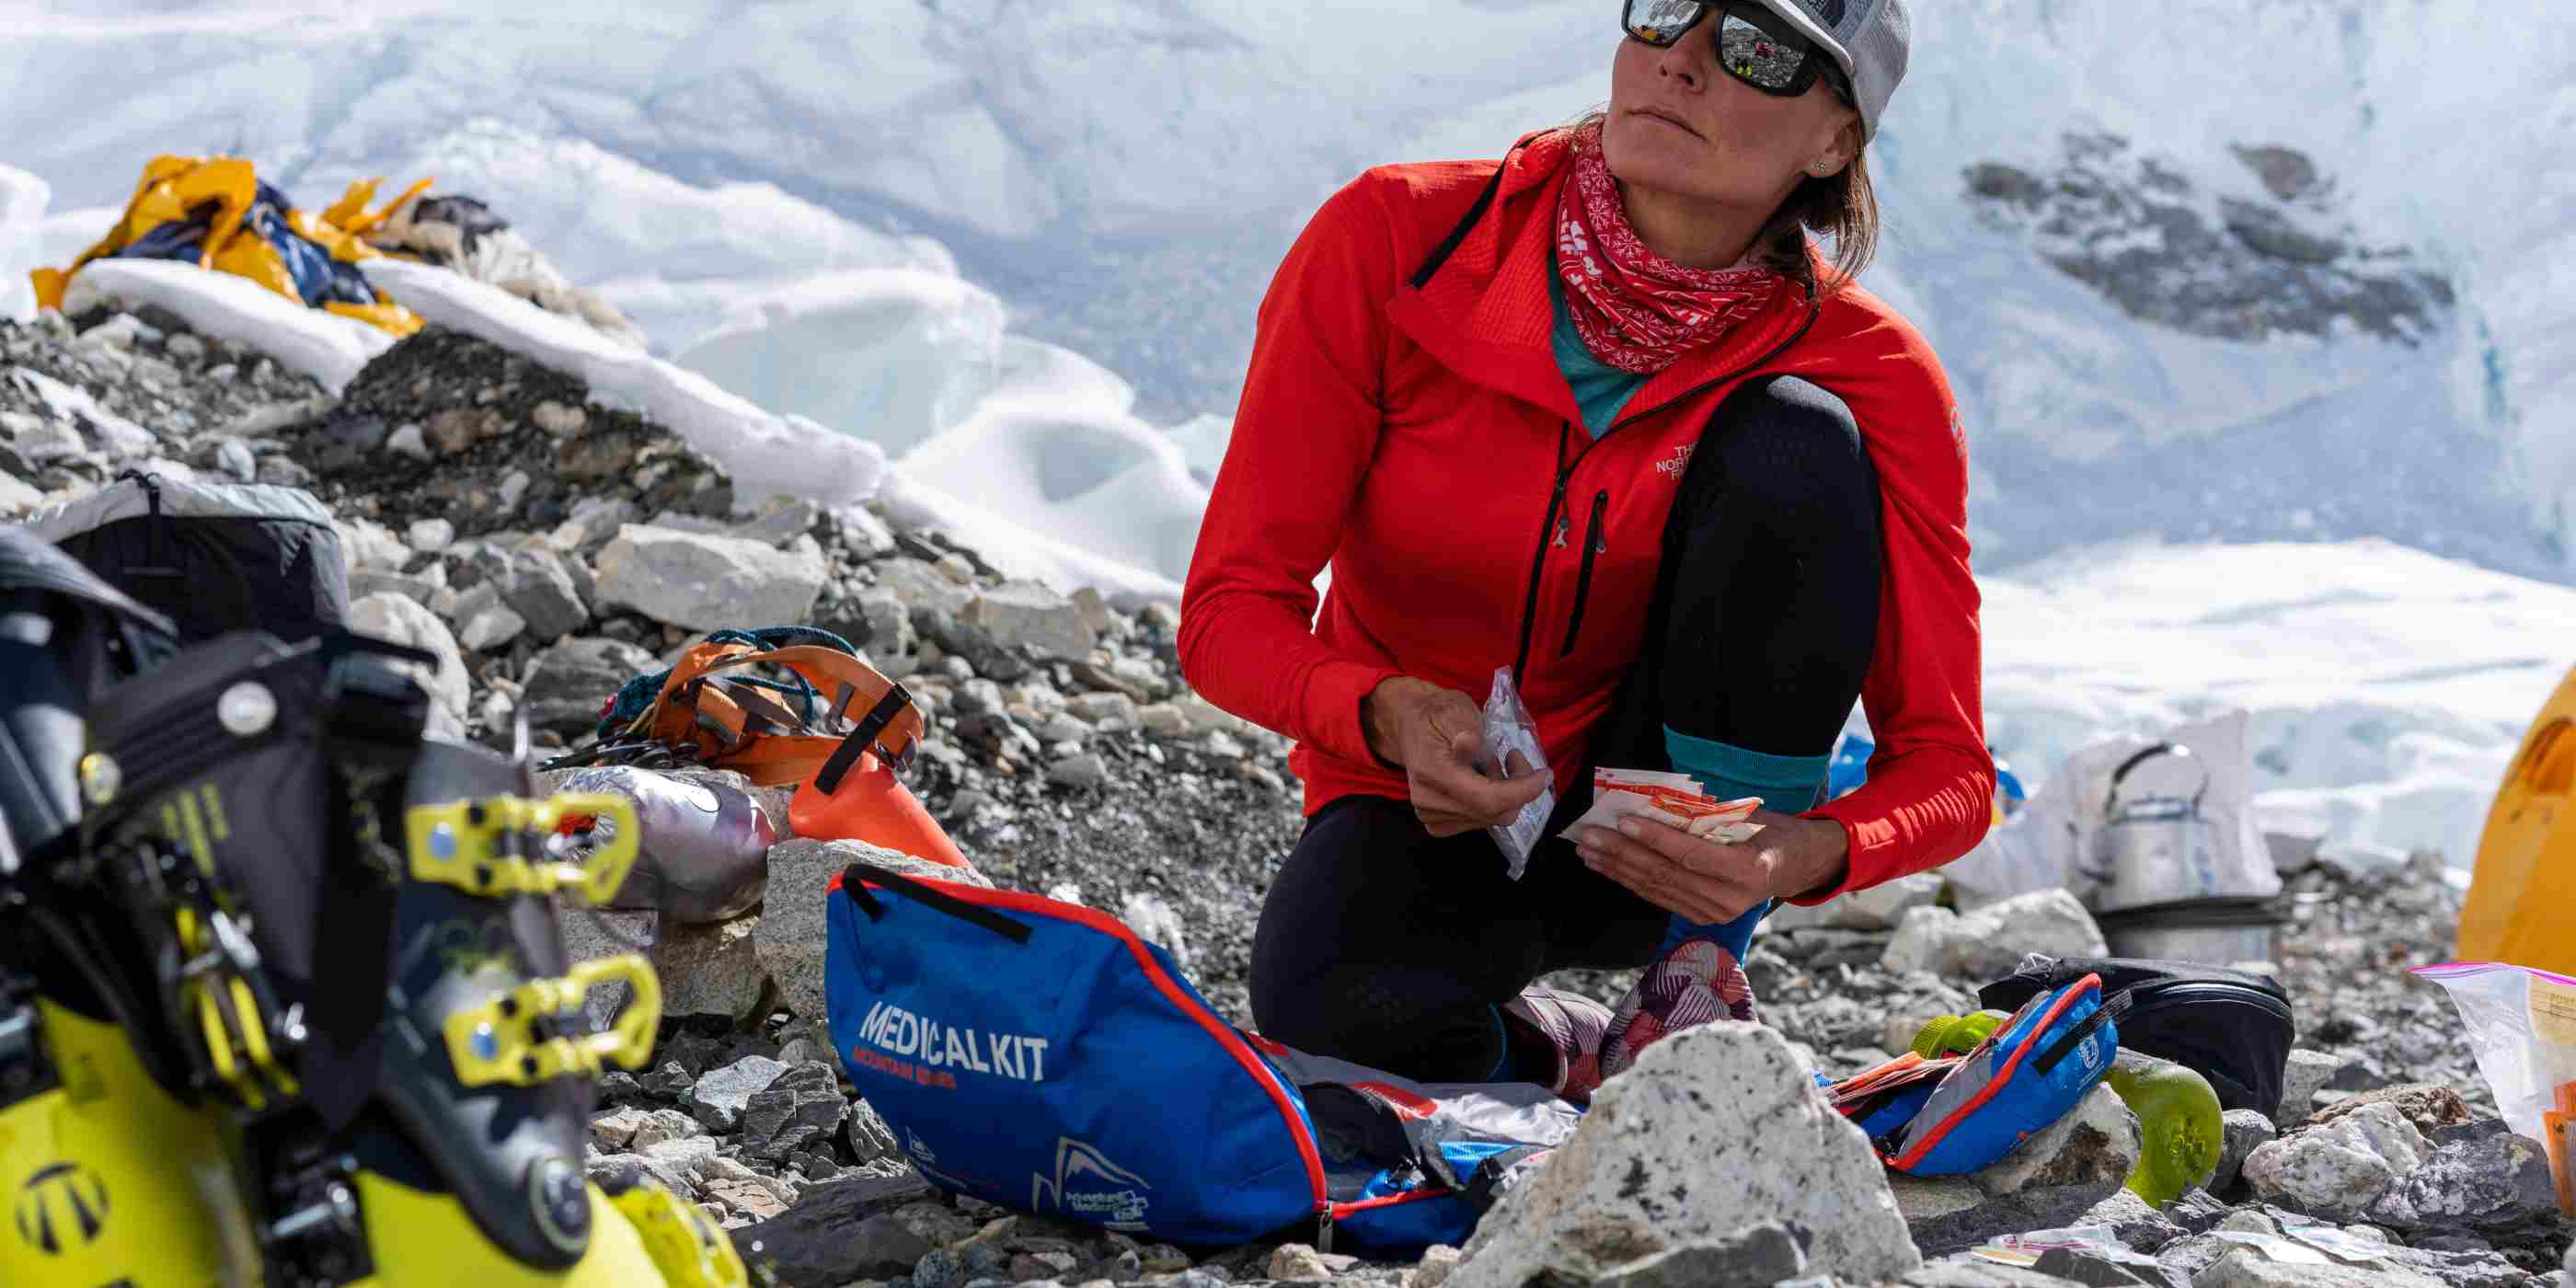 Mountain Series Medical Kit - Mountaineer woman removing kit contents on rocky ground and snow